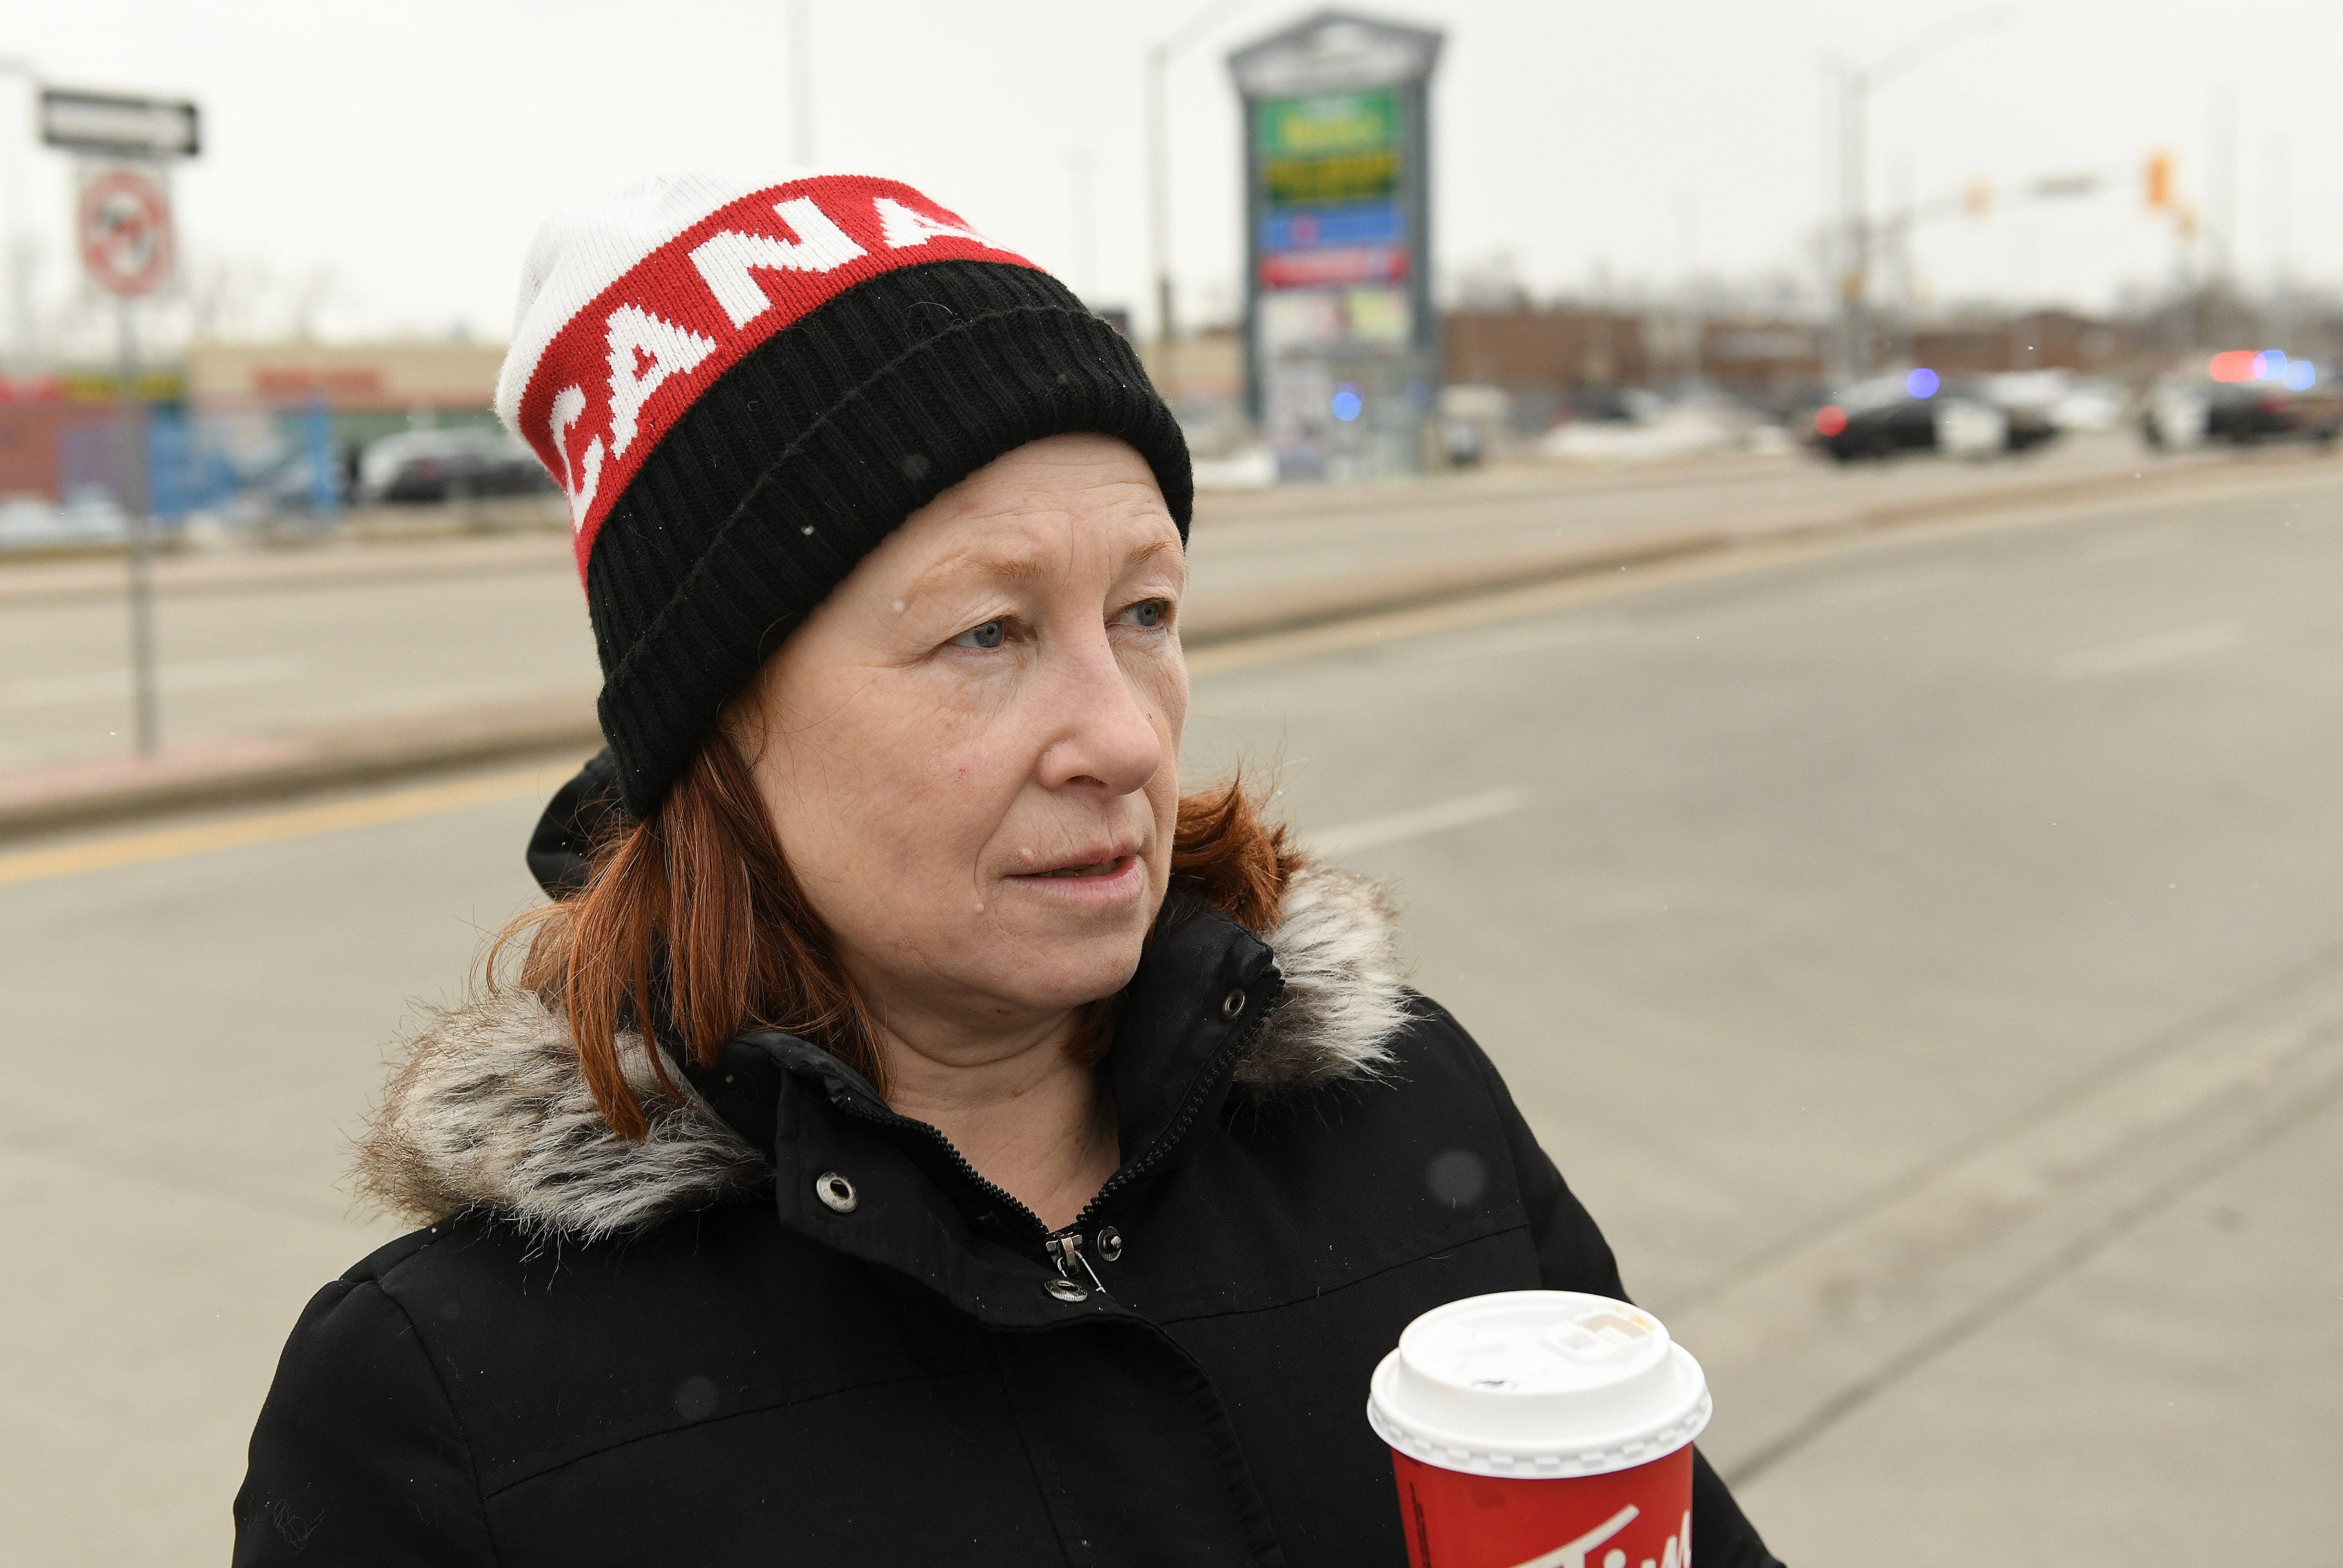 Charlene Renaud, 56, who lives a few blocks from the road that leads to the Ambassador Bridge, talks about her encounter with the police presence as she went for a walk today in Windsor, Ontario, on Feb. 13, 2022.  
(Robin Buckson / The Detroit News)